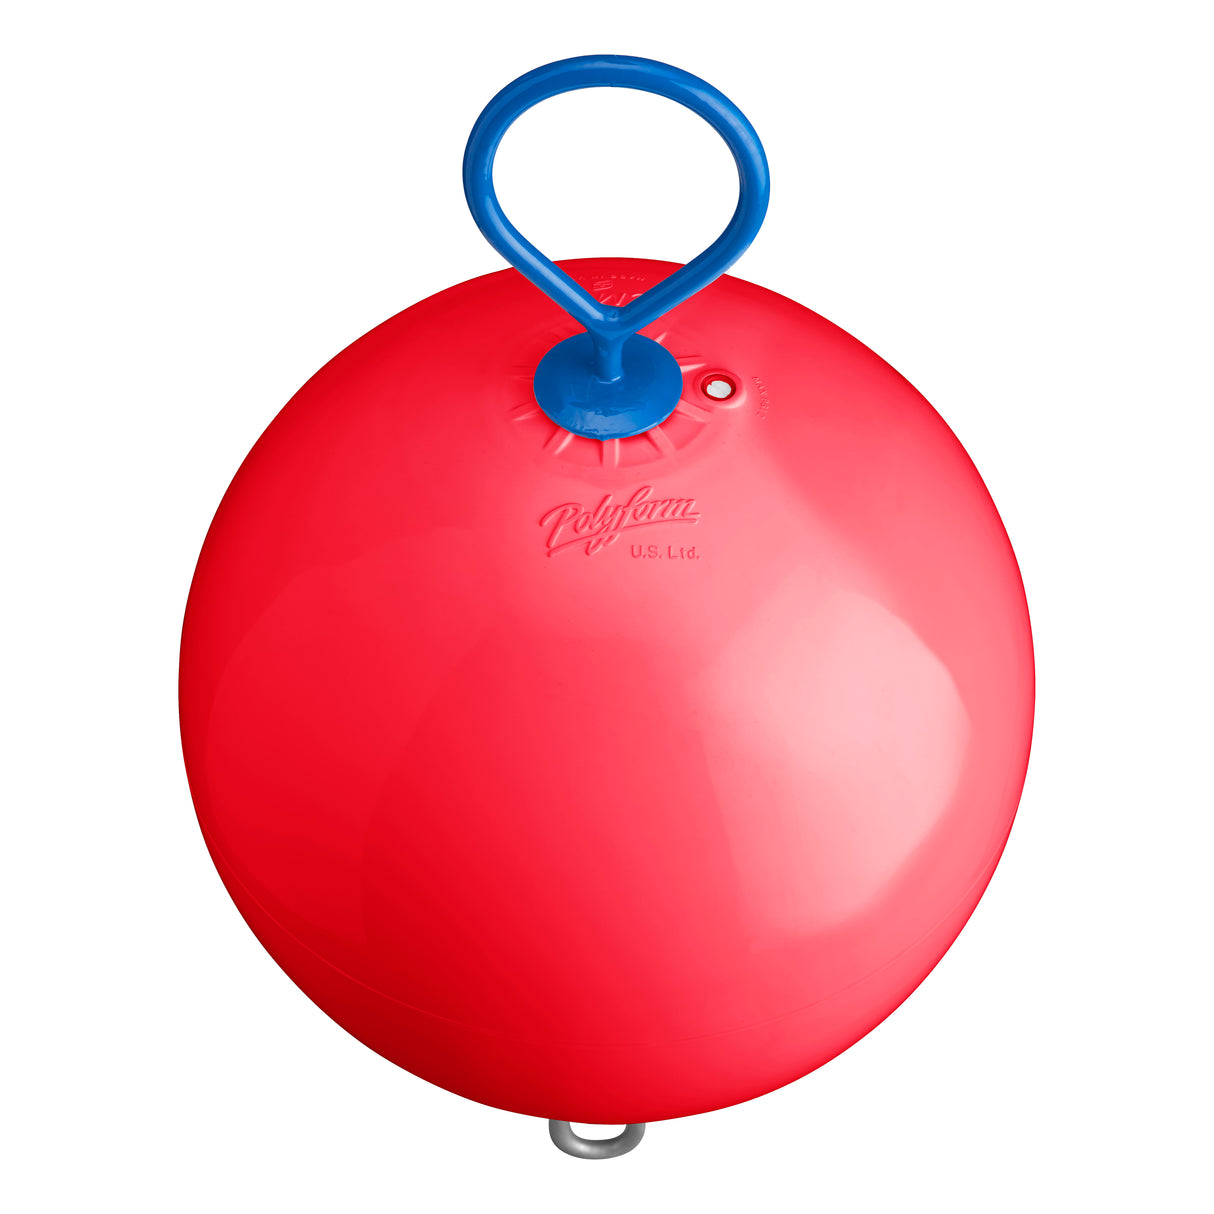 CM-3 Mooring Buoy with galvanized steel mooring iron and shackle, red